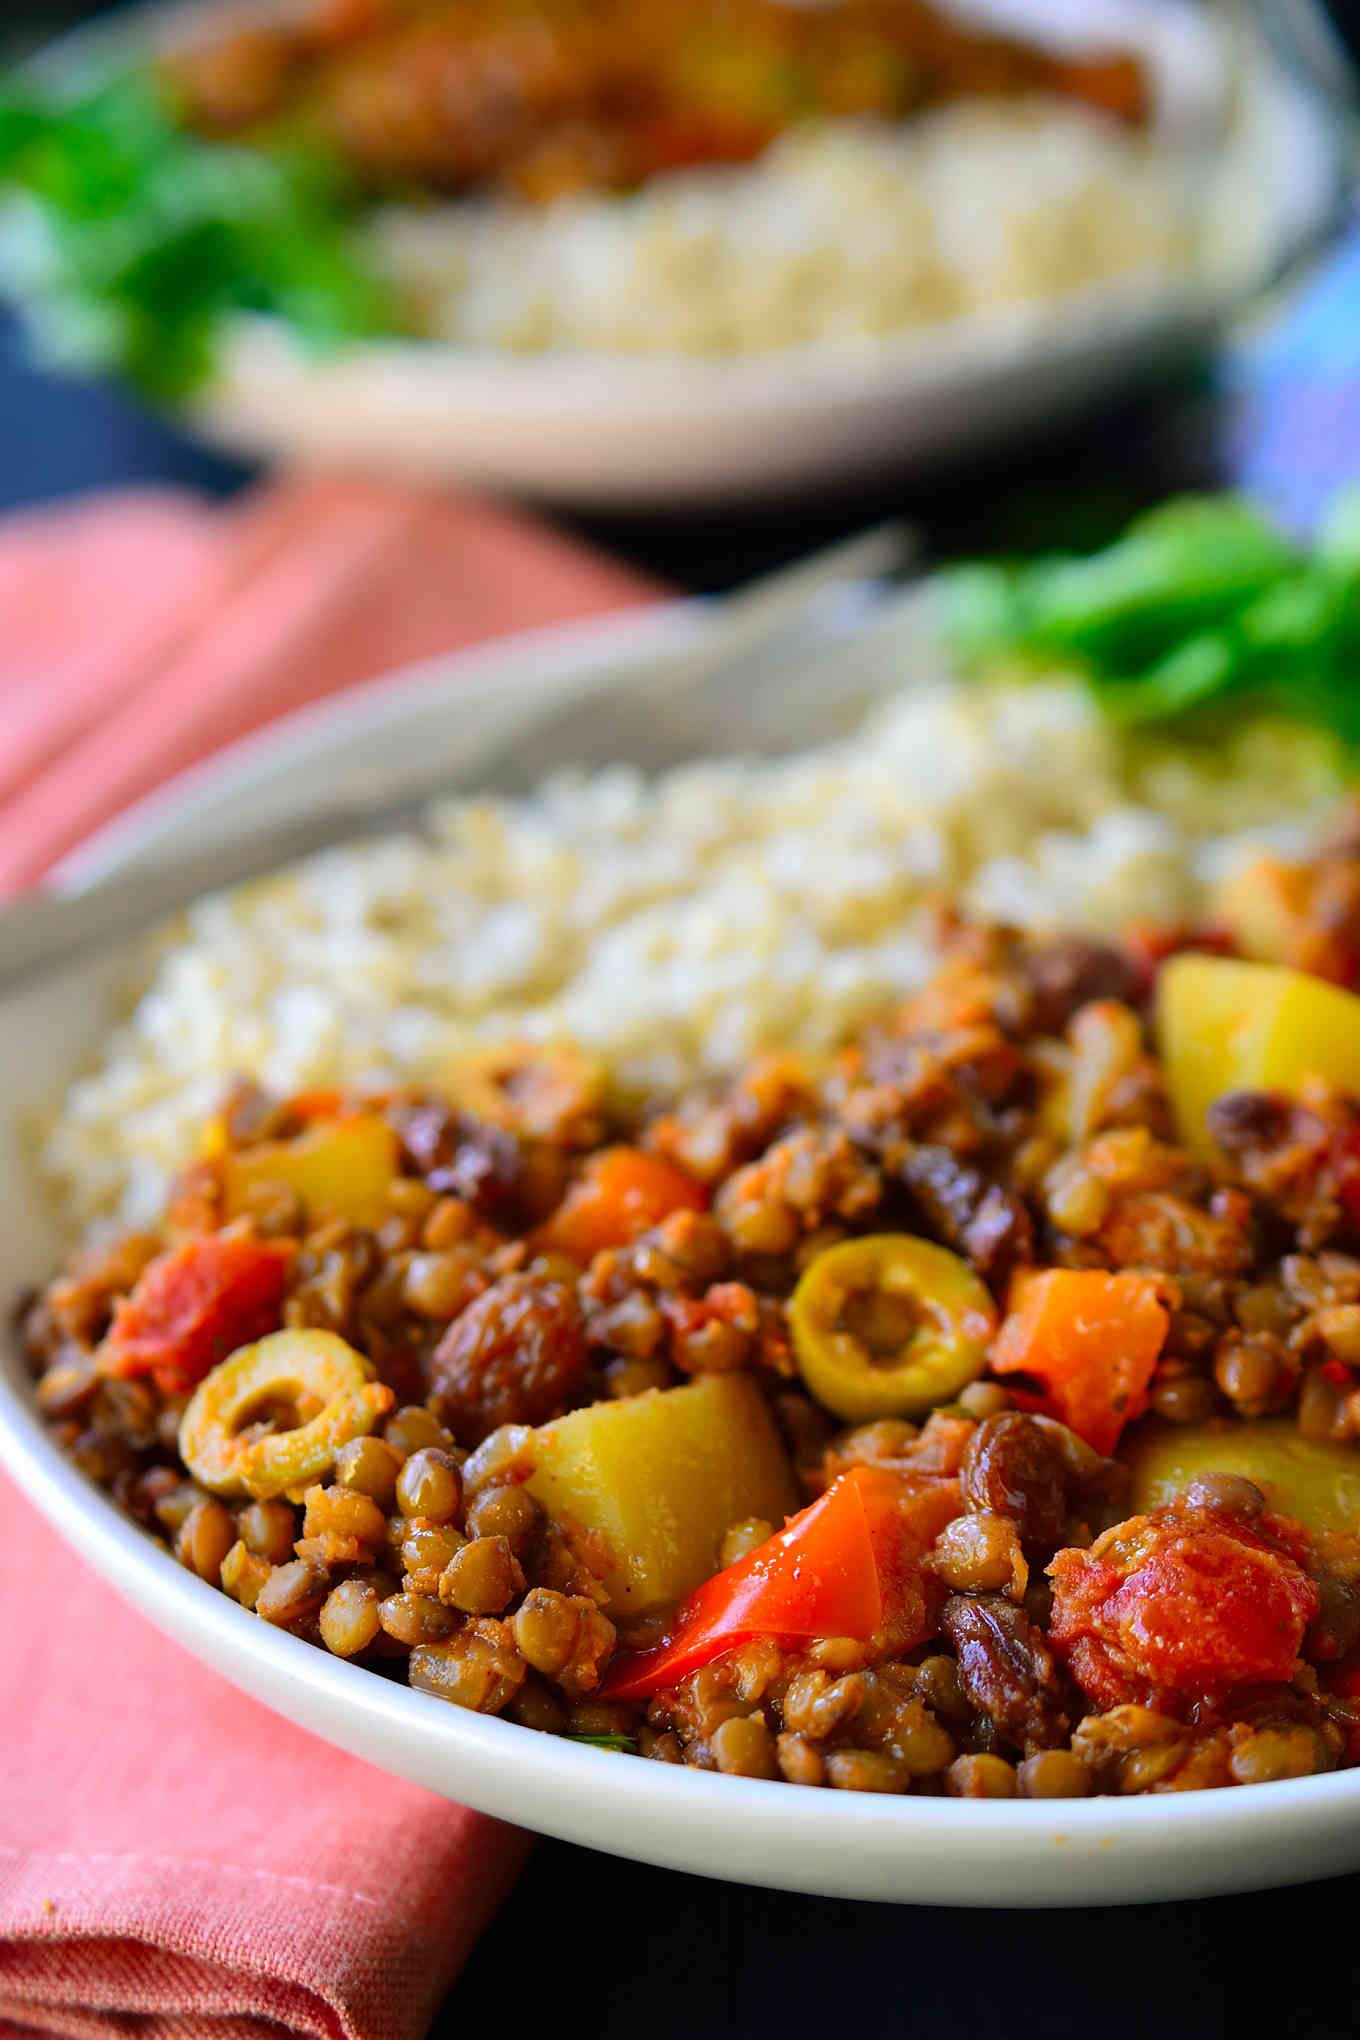 This vegan picadillo recipe is a delicious and colourful Cuban-style dish of spiced lentils, potatoes, tomatoes, olives and raisins. Served with rice, it’s quick and easy to prepare for a weeknight dinner and the warming spices of cinnamon, cumin, cloves and nutmeg make it a comforting and hearty meal for chilly weather. 